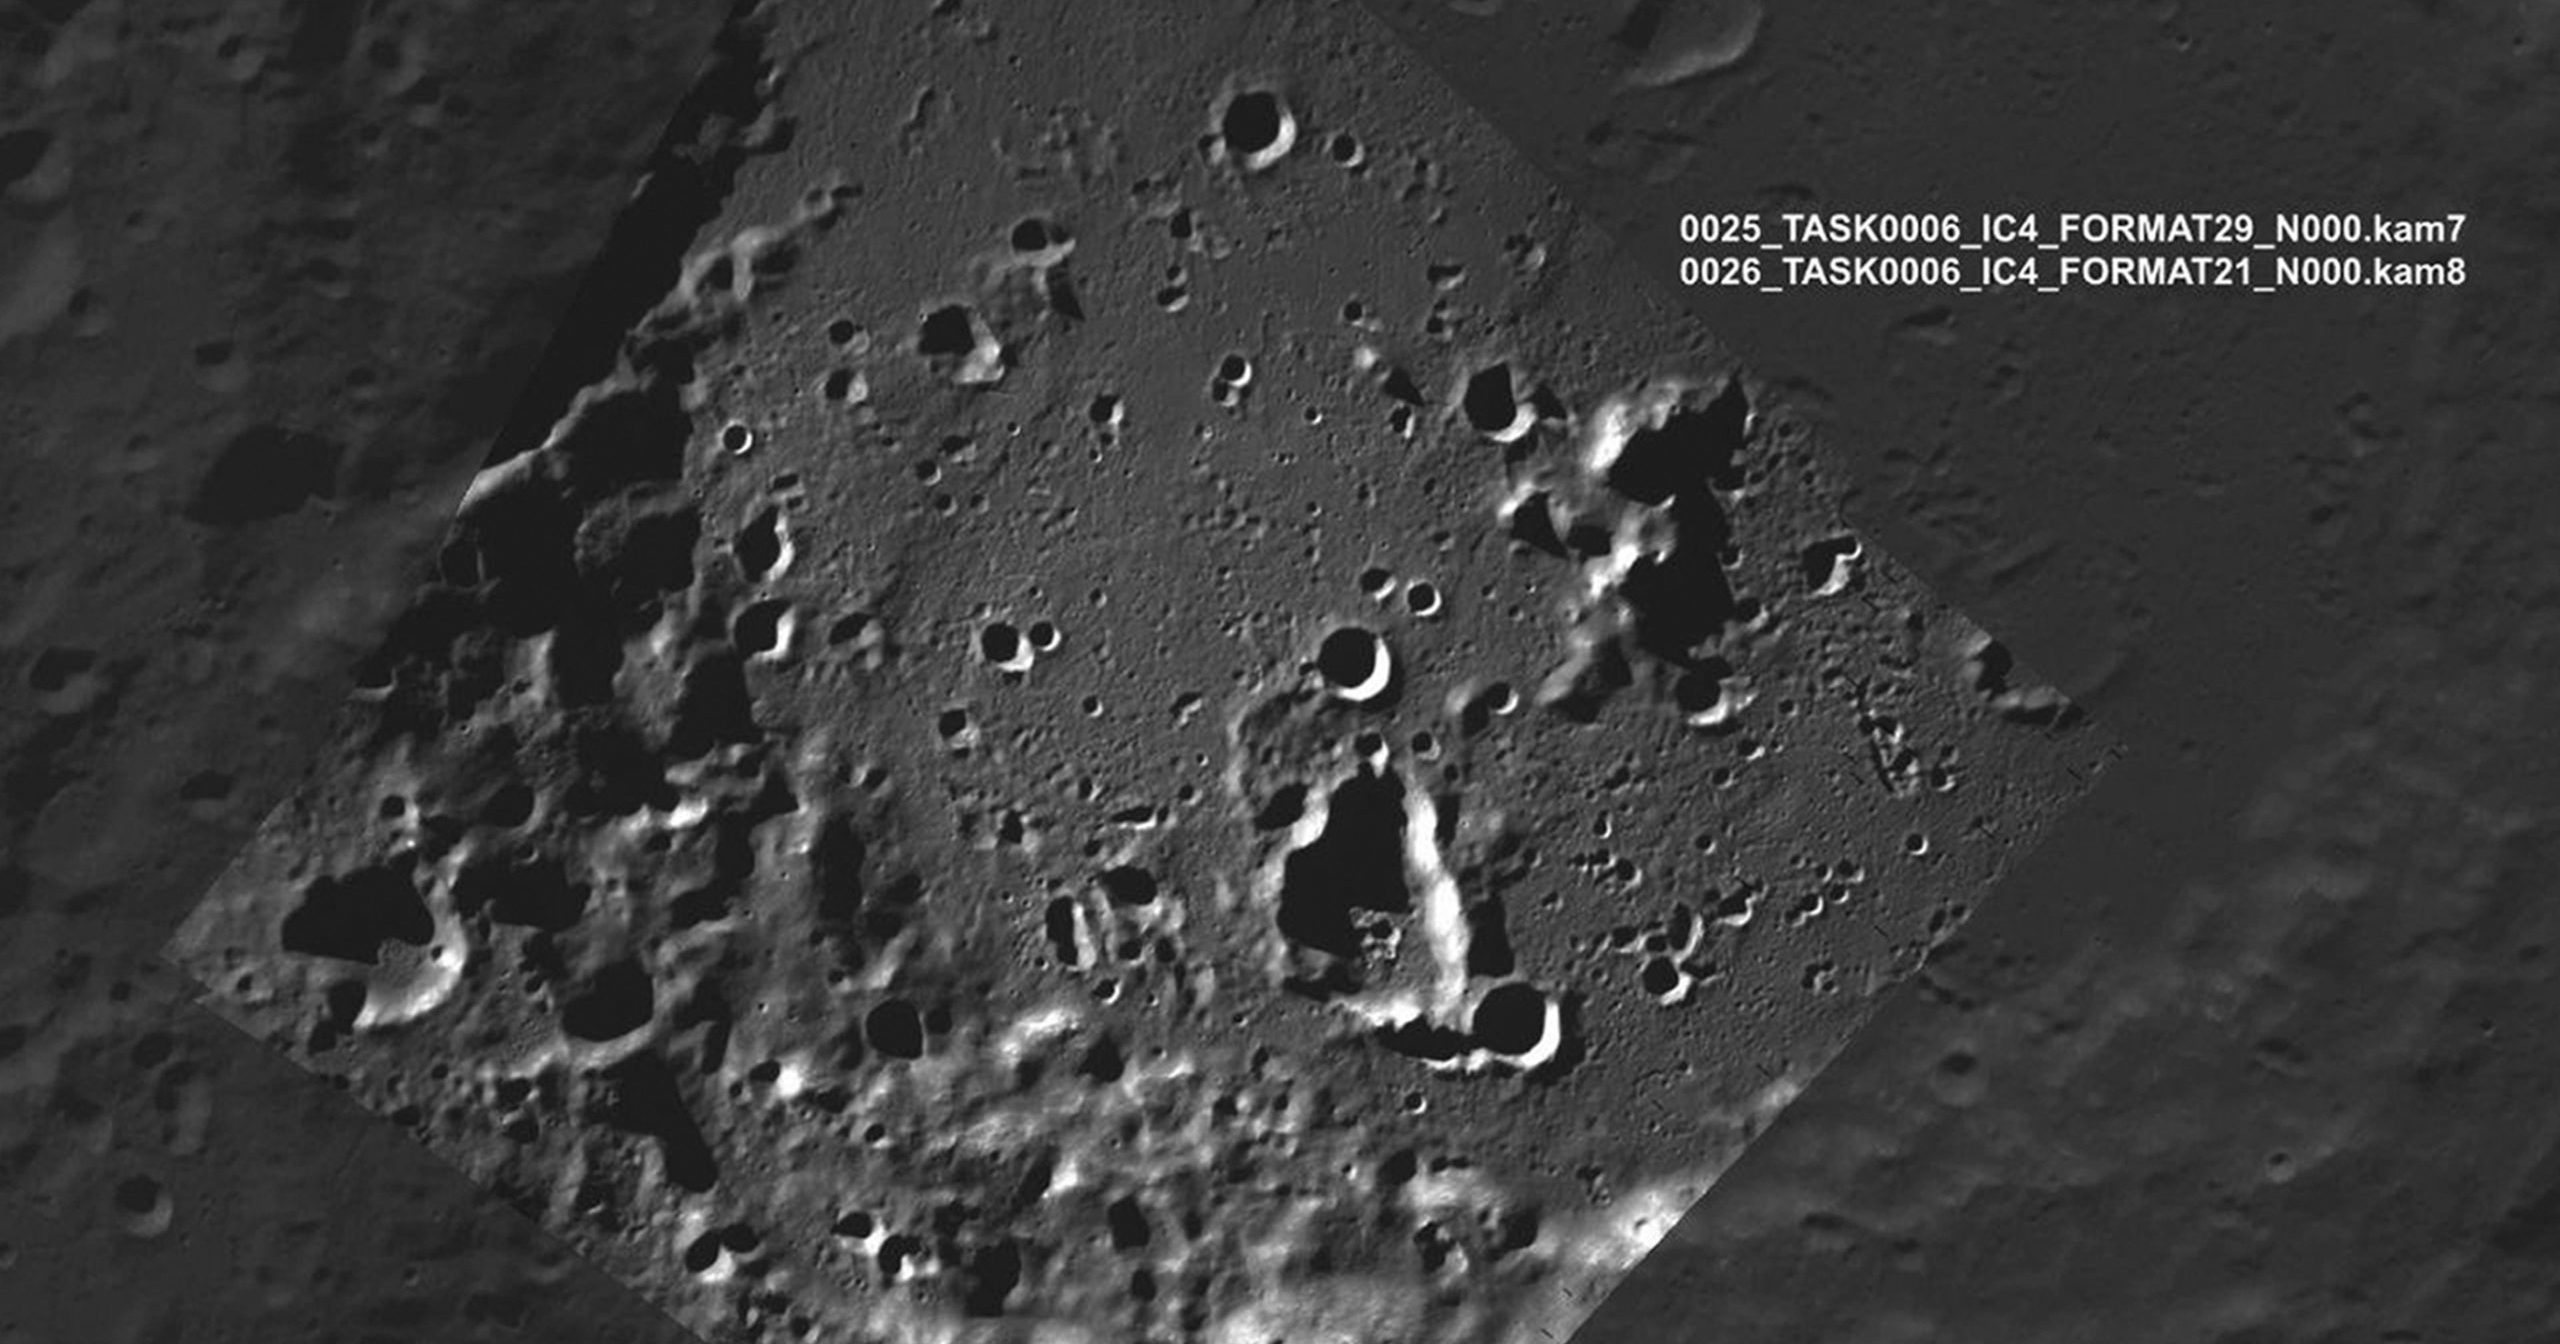 A released by Roscosmos on Thursday shows the lunar south pole region on the far side of the moon as captured by Russia's Luna-25 spacecraft before its failed attempt to land.